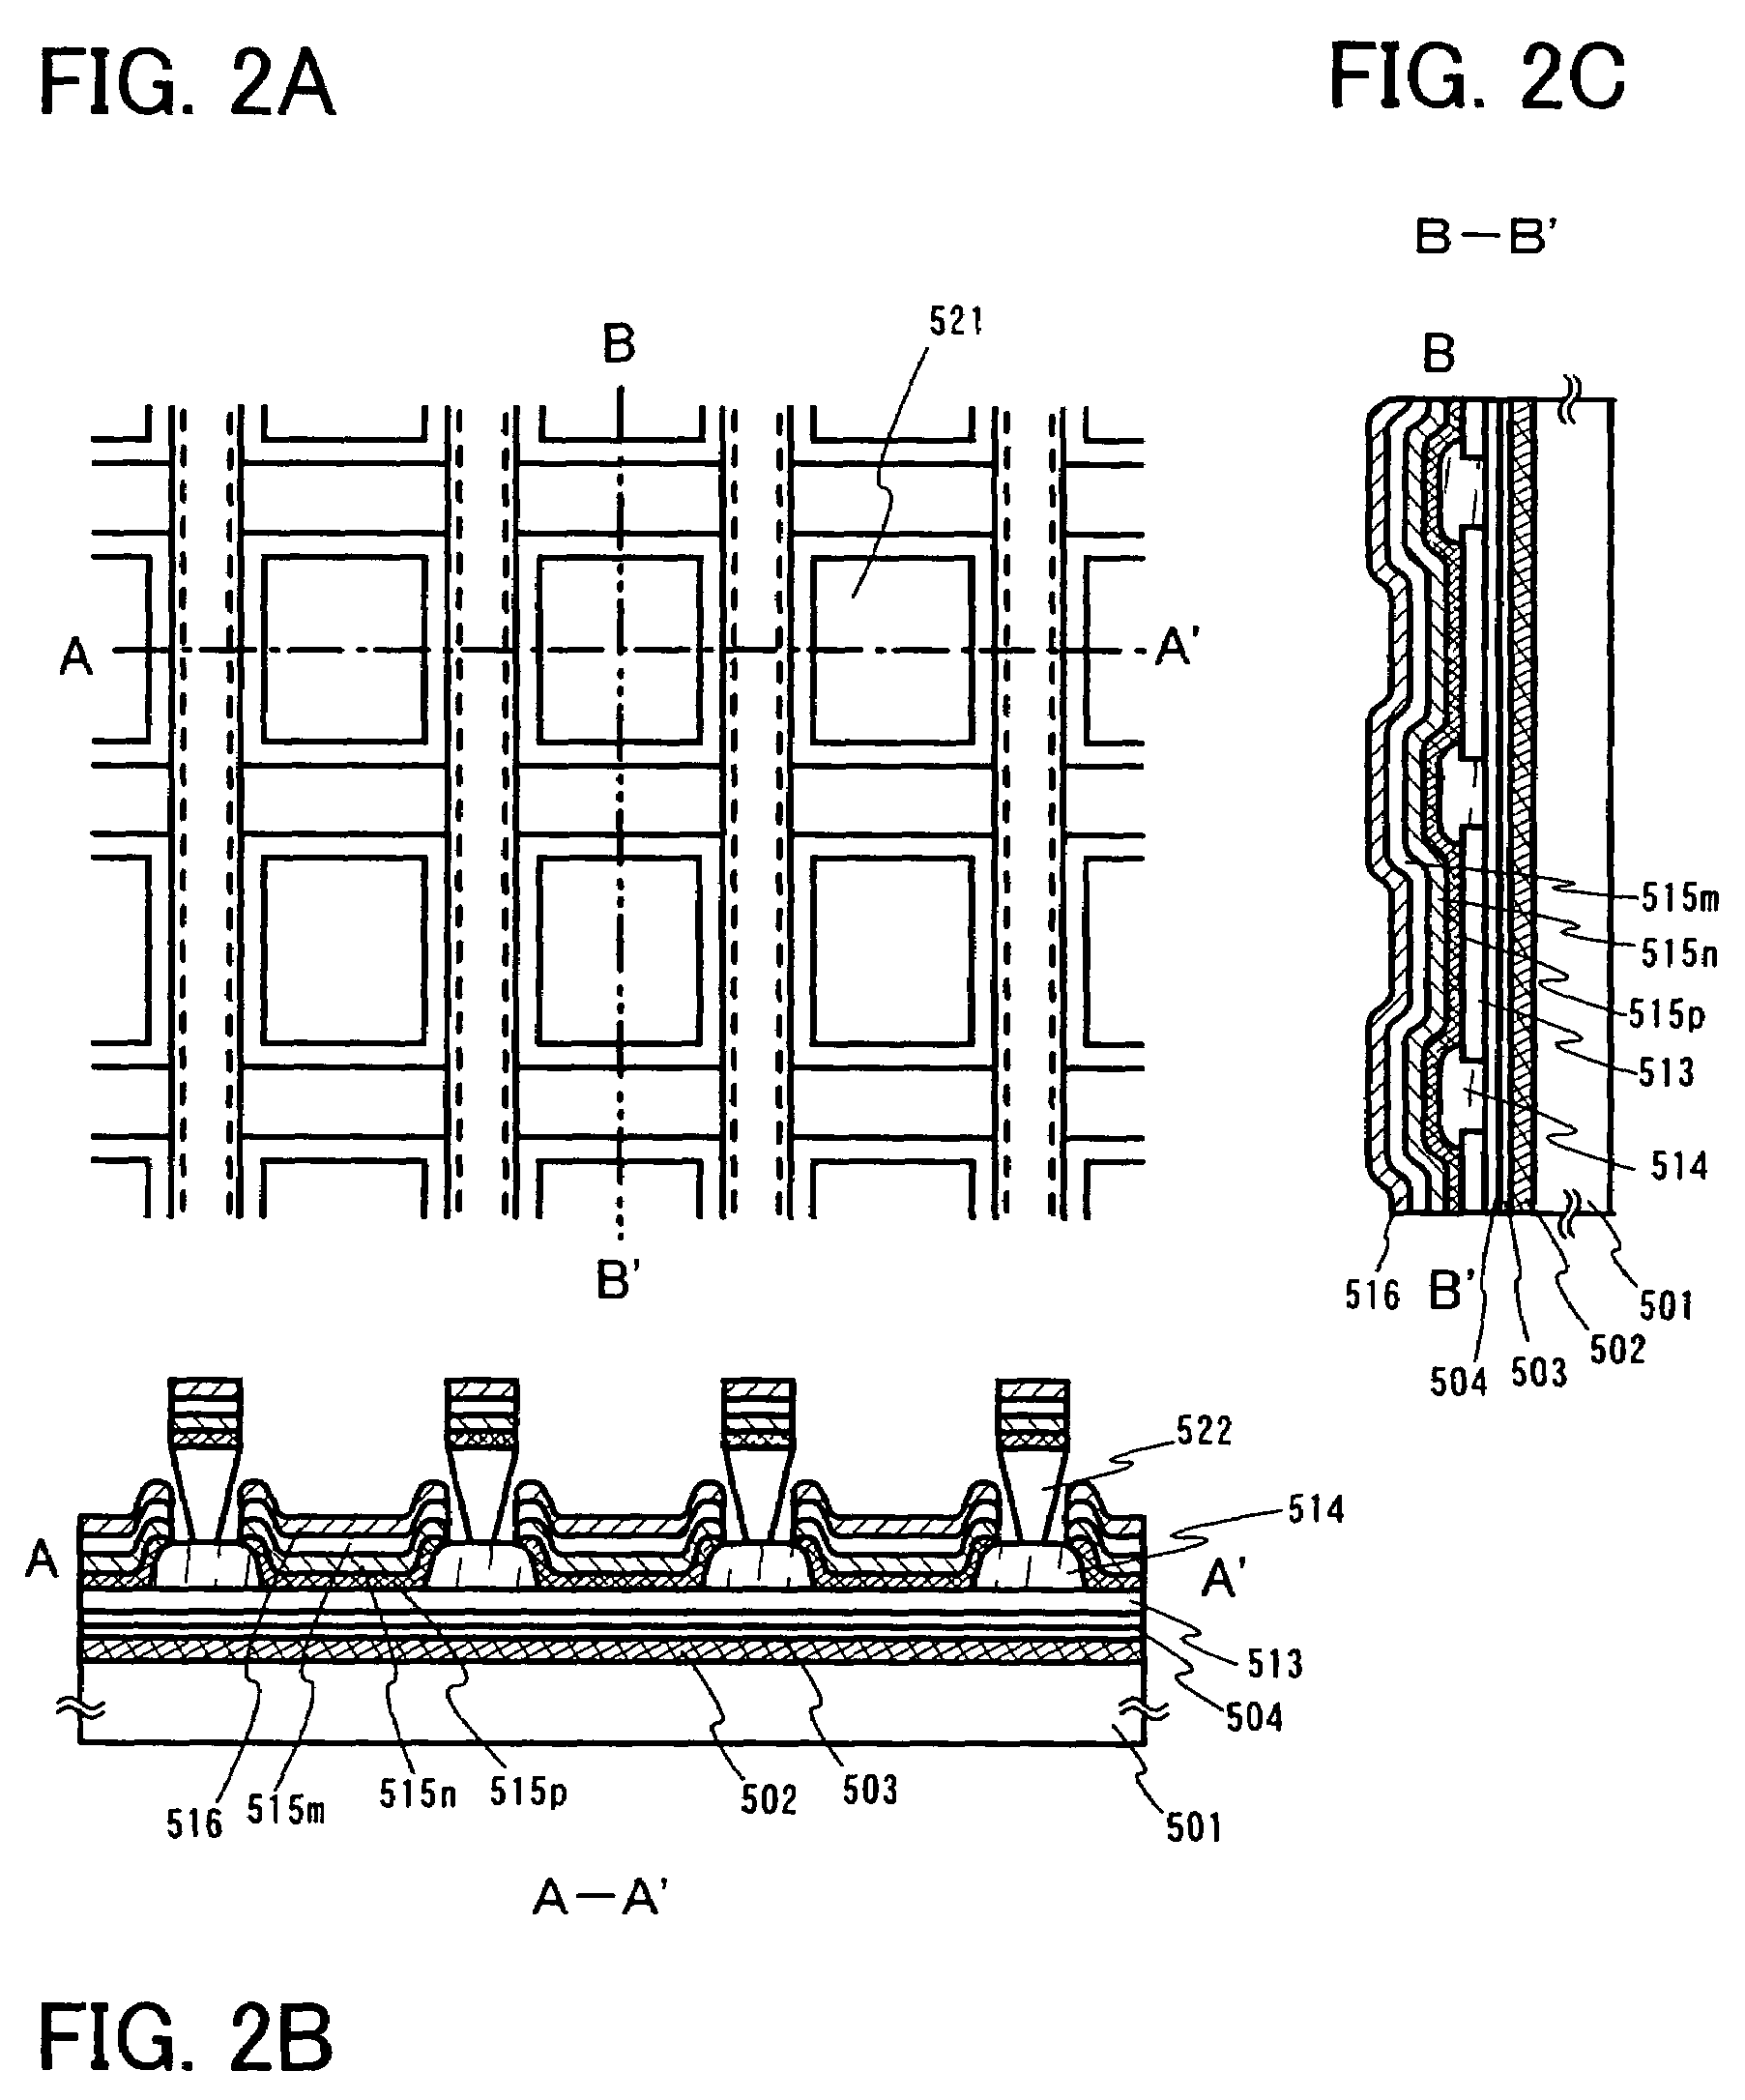 Semiconductor device with metal oxides and an organic compound